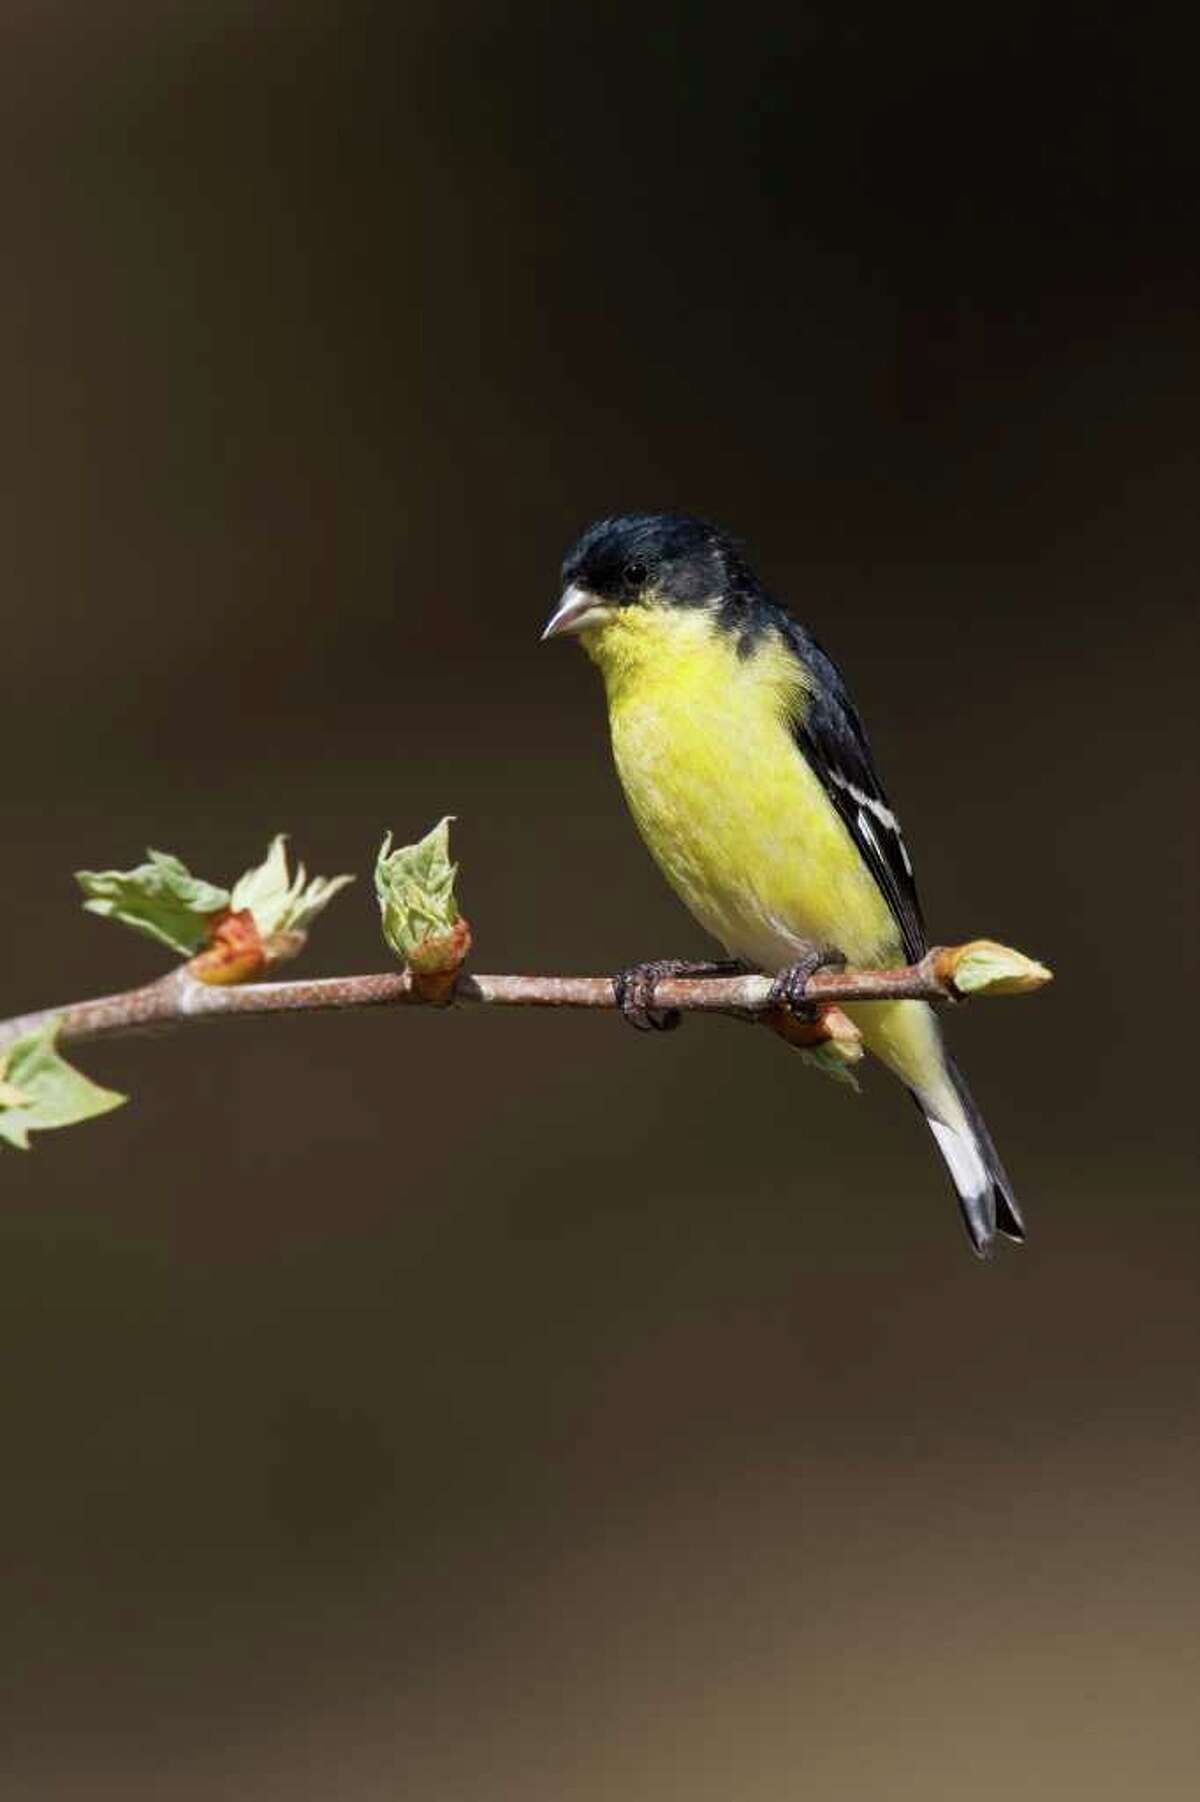 Lesser goldfinch bring a festive splash of color to the early spring landscape. Photo Credit: Kathy Adams Clark. Restricted use.